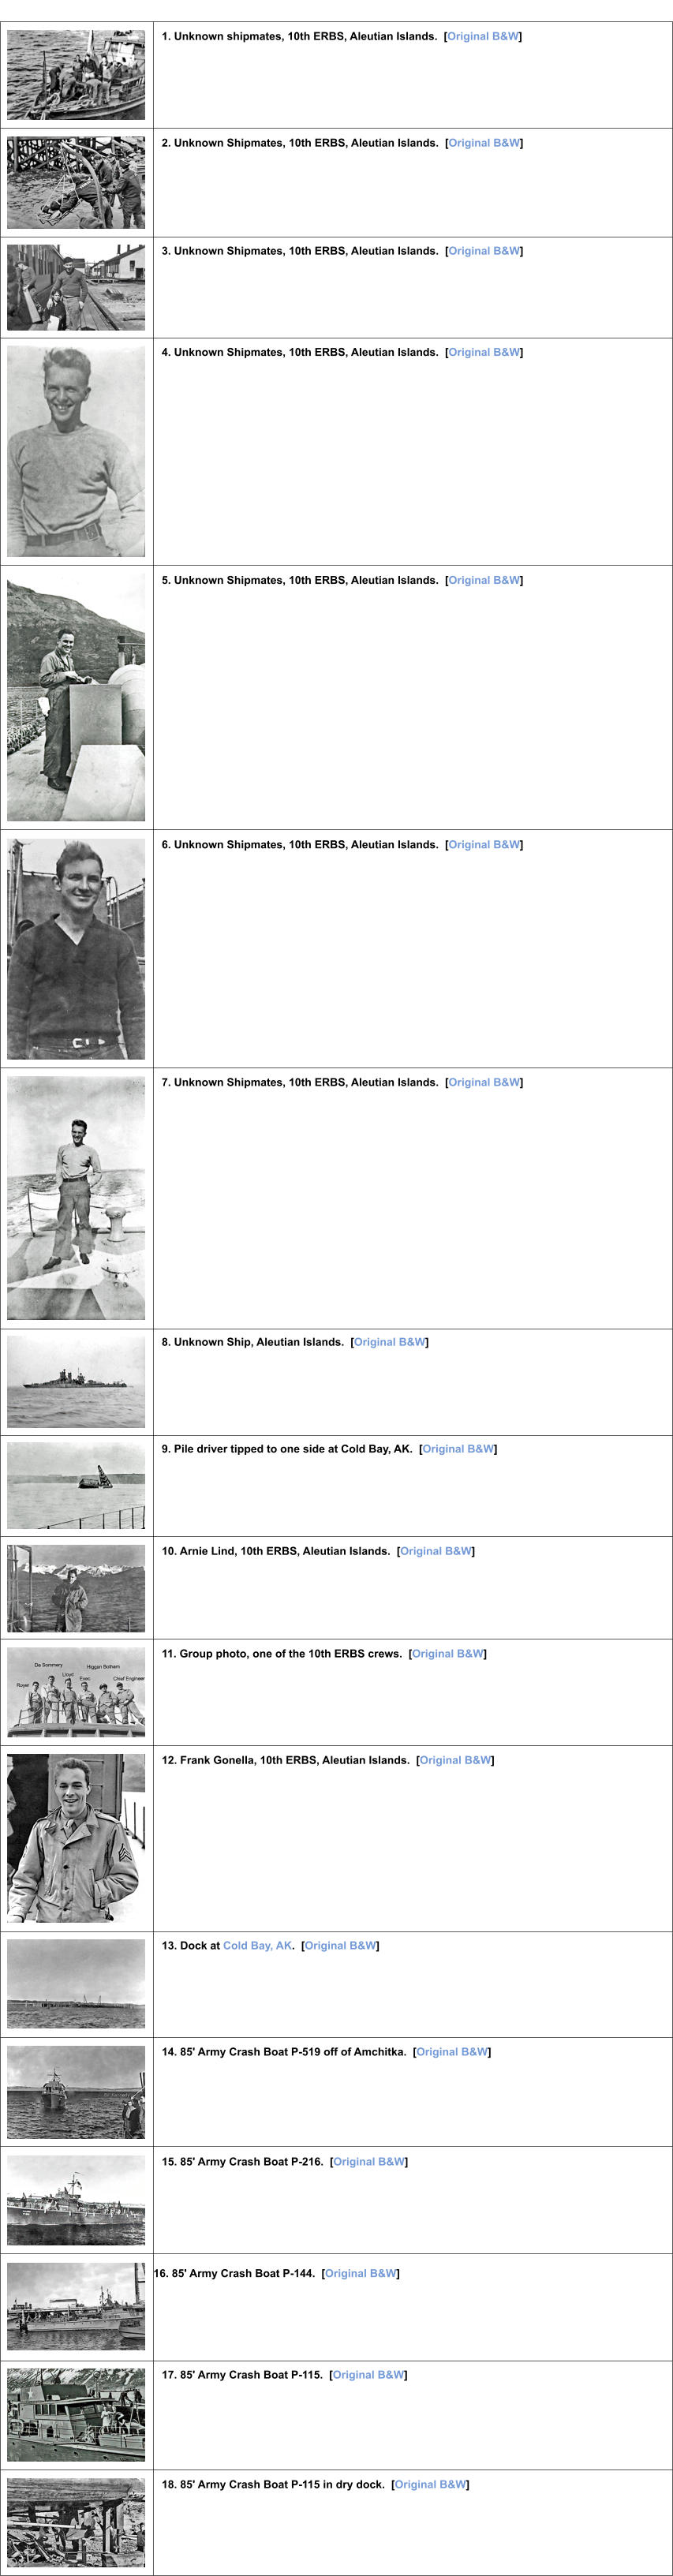 1. Unknown shipmates, 10th ERBS, Aleutian Islands.  [Original B&W] 2. Unknown Shipmates, 10th ERBS, Aleutian Islands.  [Original B&W] 3. Unknown Shipmates, 10th ERBS, Aleutian Islands.  [Original B&W] 4. Unknown Shipmates, 10th ERBS, Aleutian Islands.  [Original B&W] 5. Unknown Shipmates, 10th ERBS, Aleutian Islands.  [Original B&W] 6. Unknown Shipmates, 10th ERBS, Aleutian Islands.  [Original B&W] 7. Unknown Shipmates, 10th ERBS, Aleutian Islands.  [Original B&W] 8. Unknown Ship, Aleutian Islands.  [Original B&W] 9. Pile driver tipped to one side at Cold Bay, AK.  [Original B&W] 10. Arnie Lind, 10th ERBS, Aleutian Islands.  [Original B&W] 11. Group photo, one of the 10th ERBS crews.  [Original B&W] 12. Frank Gonella, 10th ERBS, Aleutian Islands.  [Original B&W] 13. Dock at Cold Bay, AK.  [Original B&W] 14. 85' Army Crash Boat P-519 off of Amchitka.  [Original B&W] 15. 85' Army Crash Boat P-216.  [Original B&W] 16. 85' Army Crash Boat P-144.  [Original B&W] 17. 85' Army Crash Boat P-115.  [Original B&W] 18. 85' Army Crash Boat P-115 in dry dock.  [Original B&W]